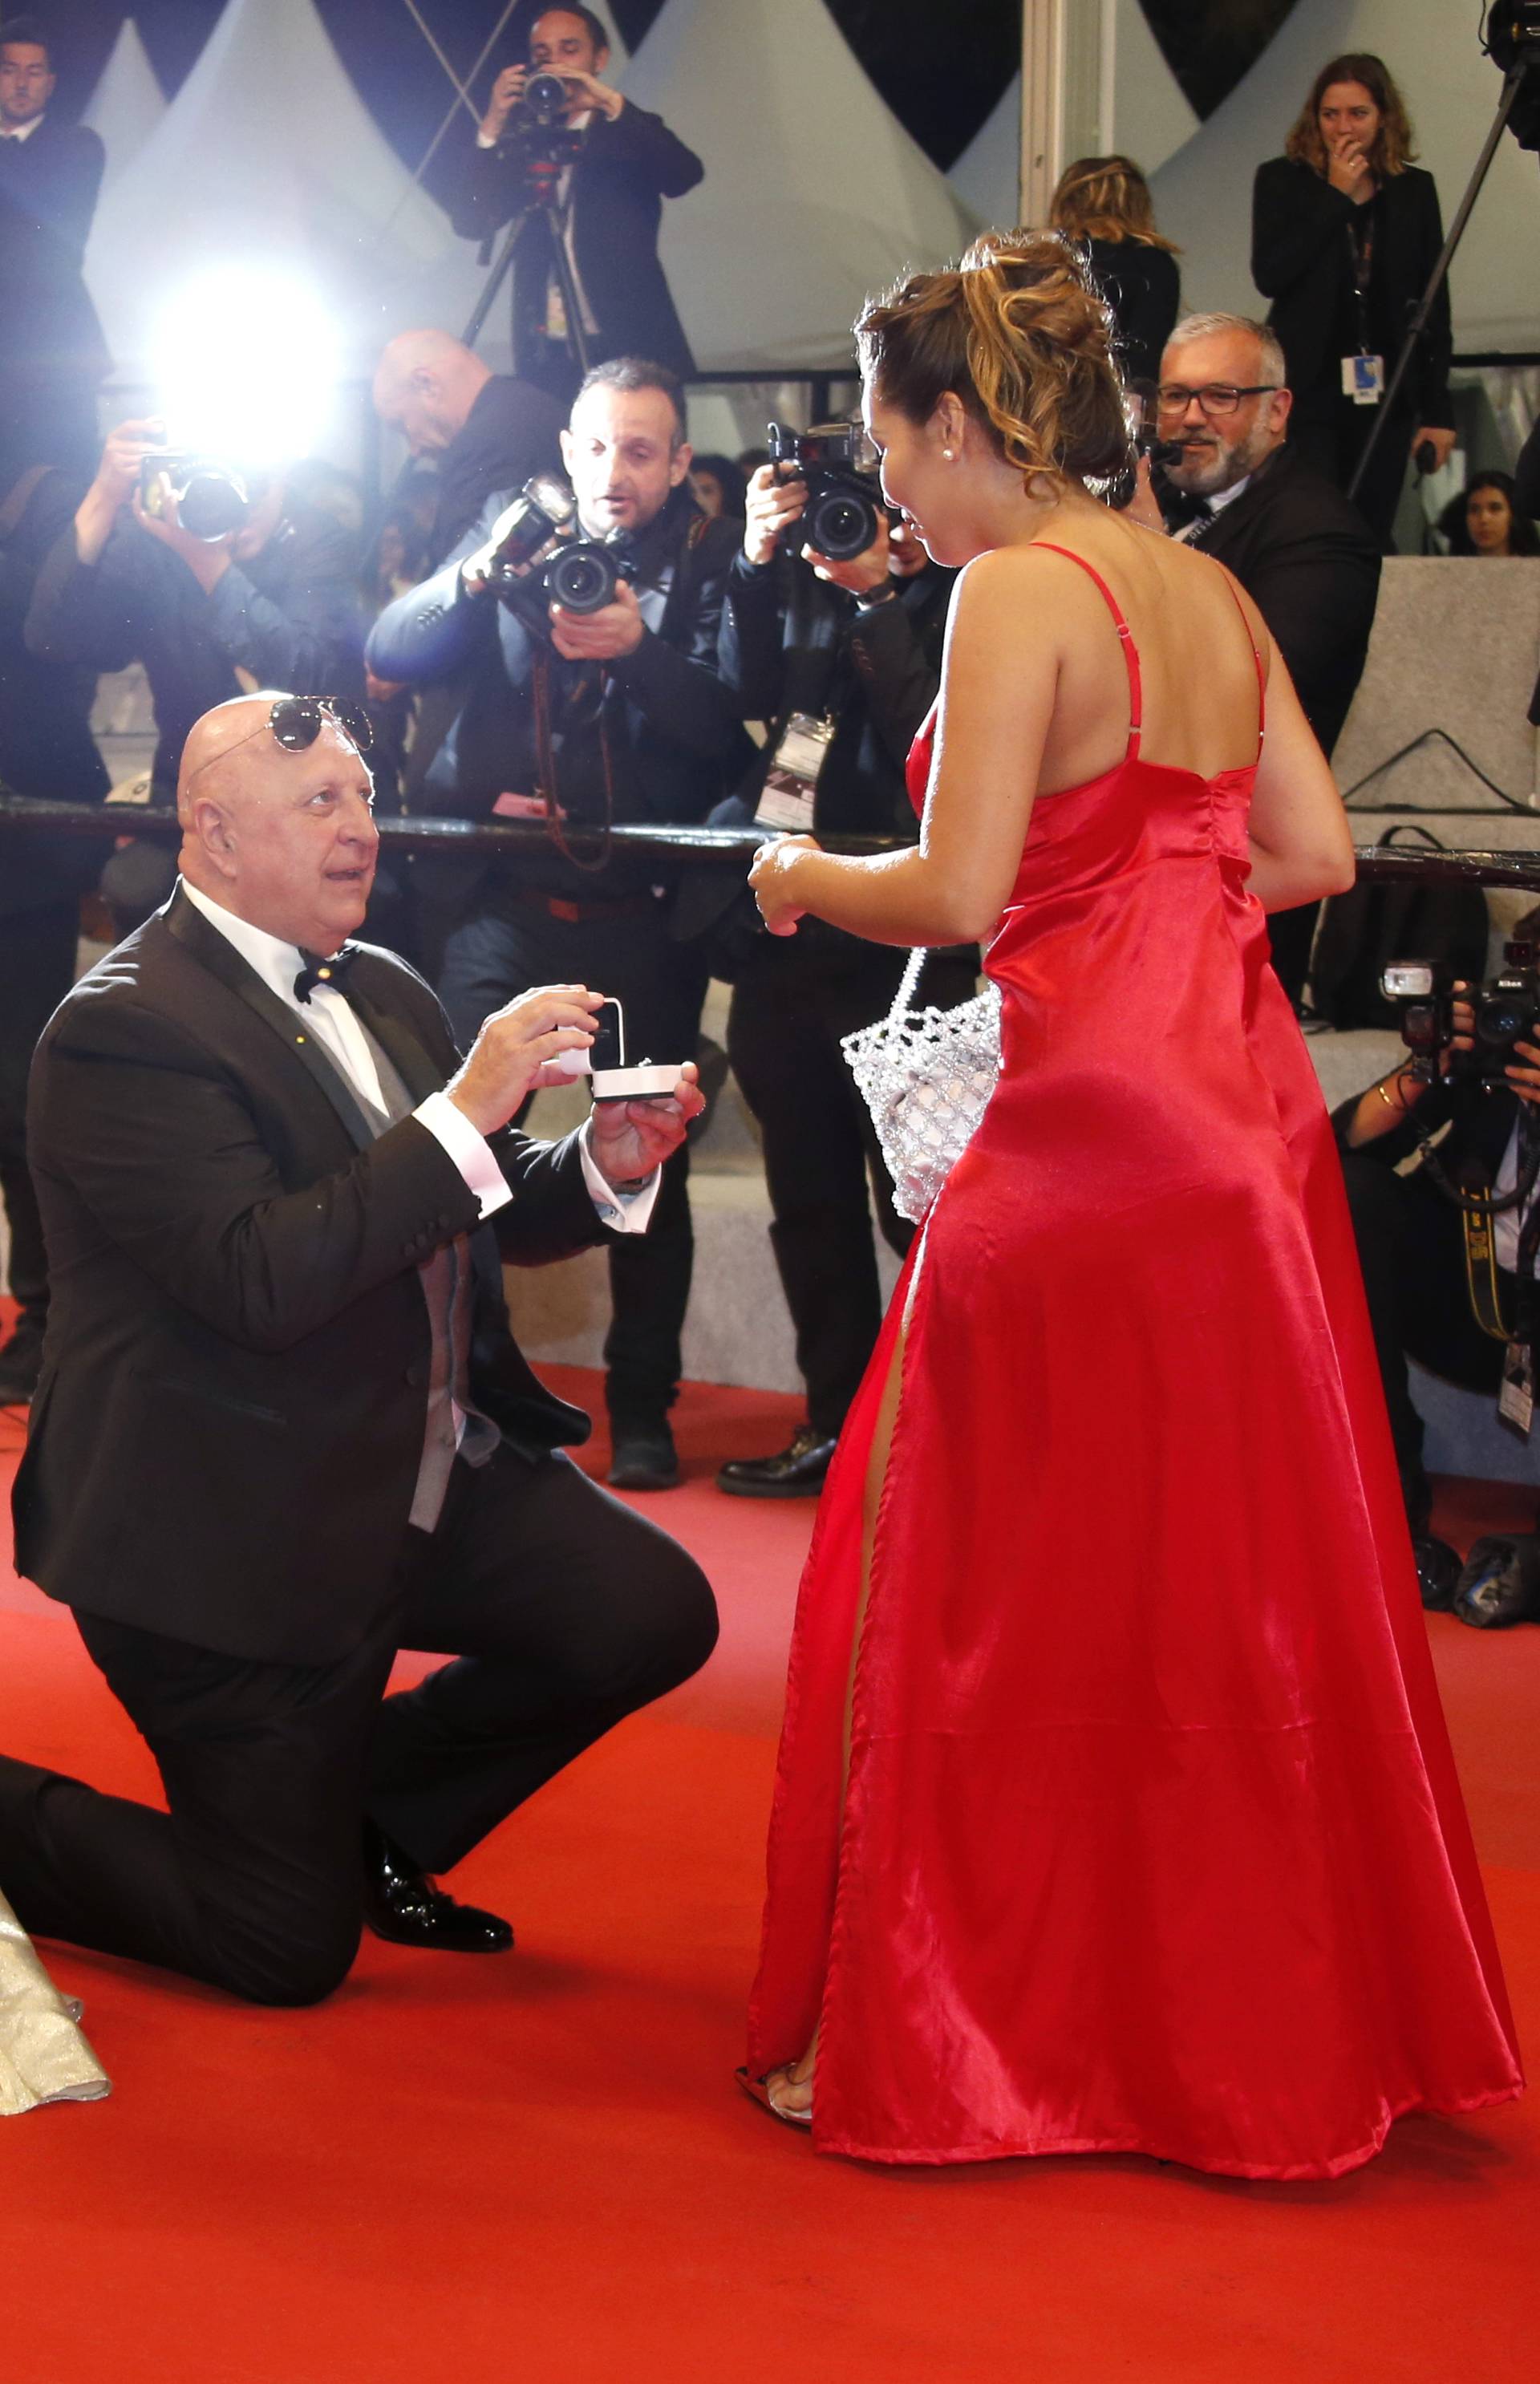 72nd Cannes Film Festival - Screening of the film "Mektoub My Love: Intermezzo" in competition - Red Carpet Arrivals